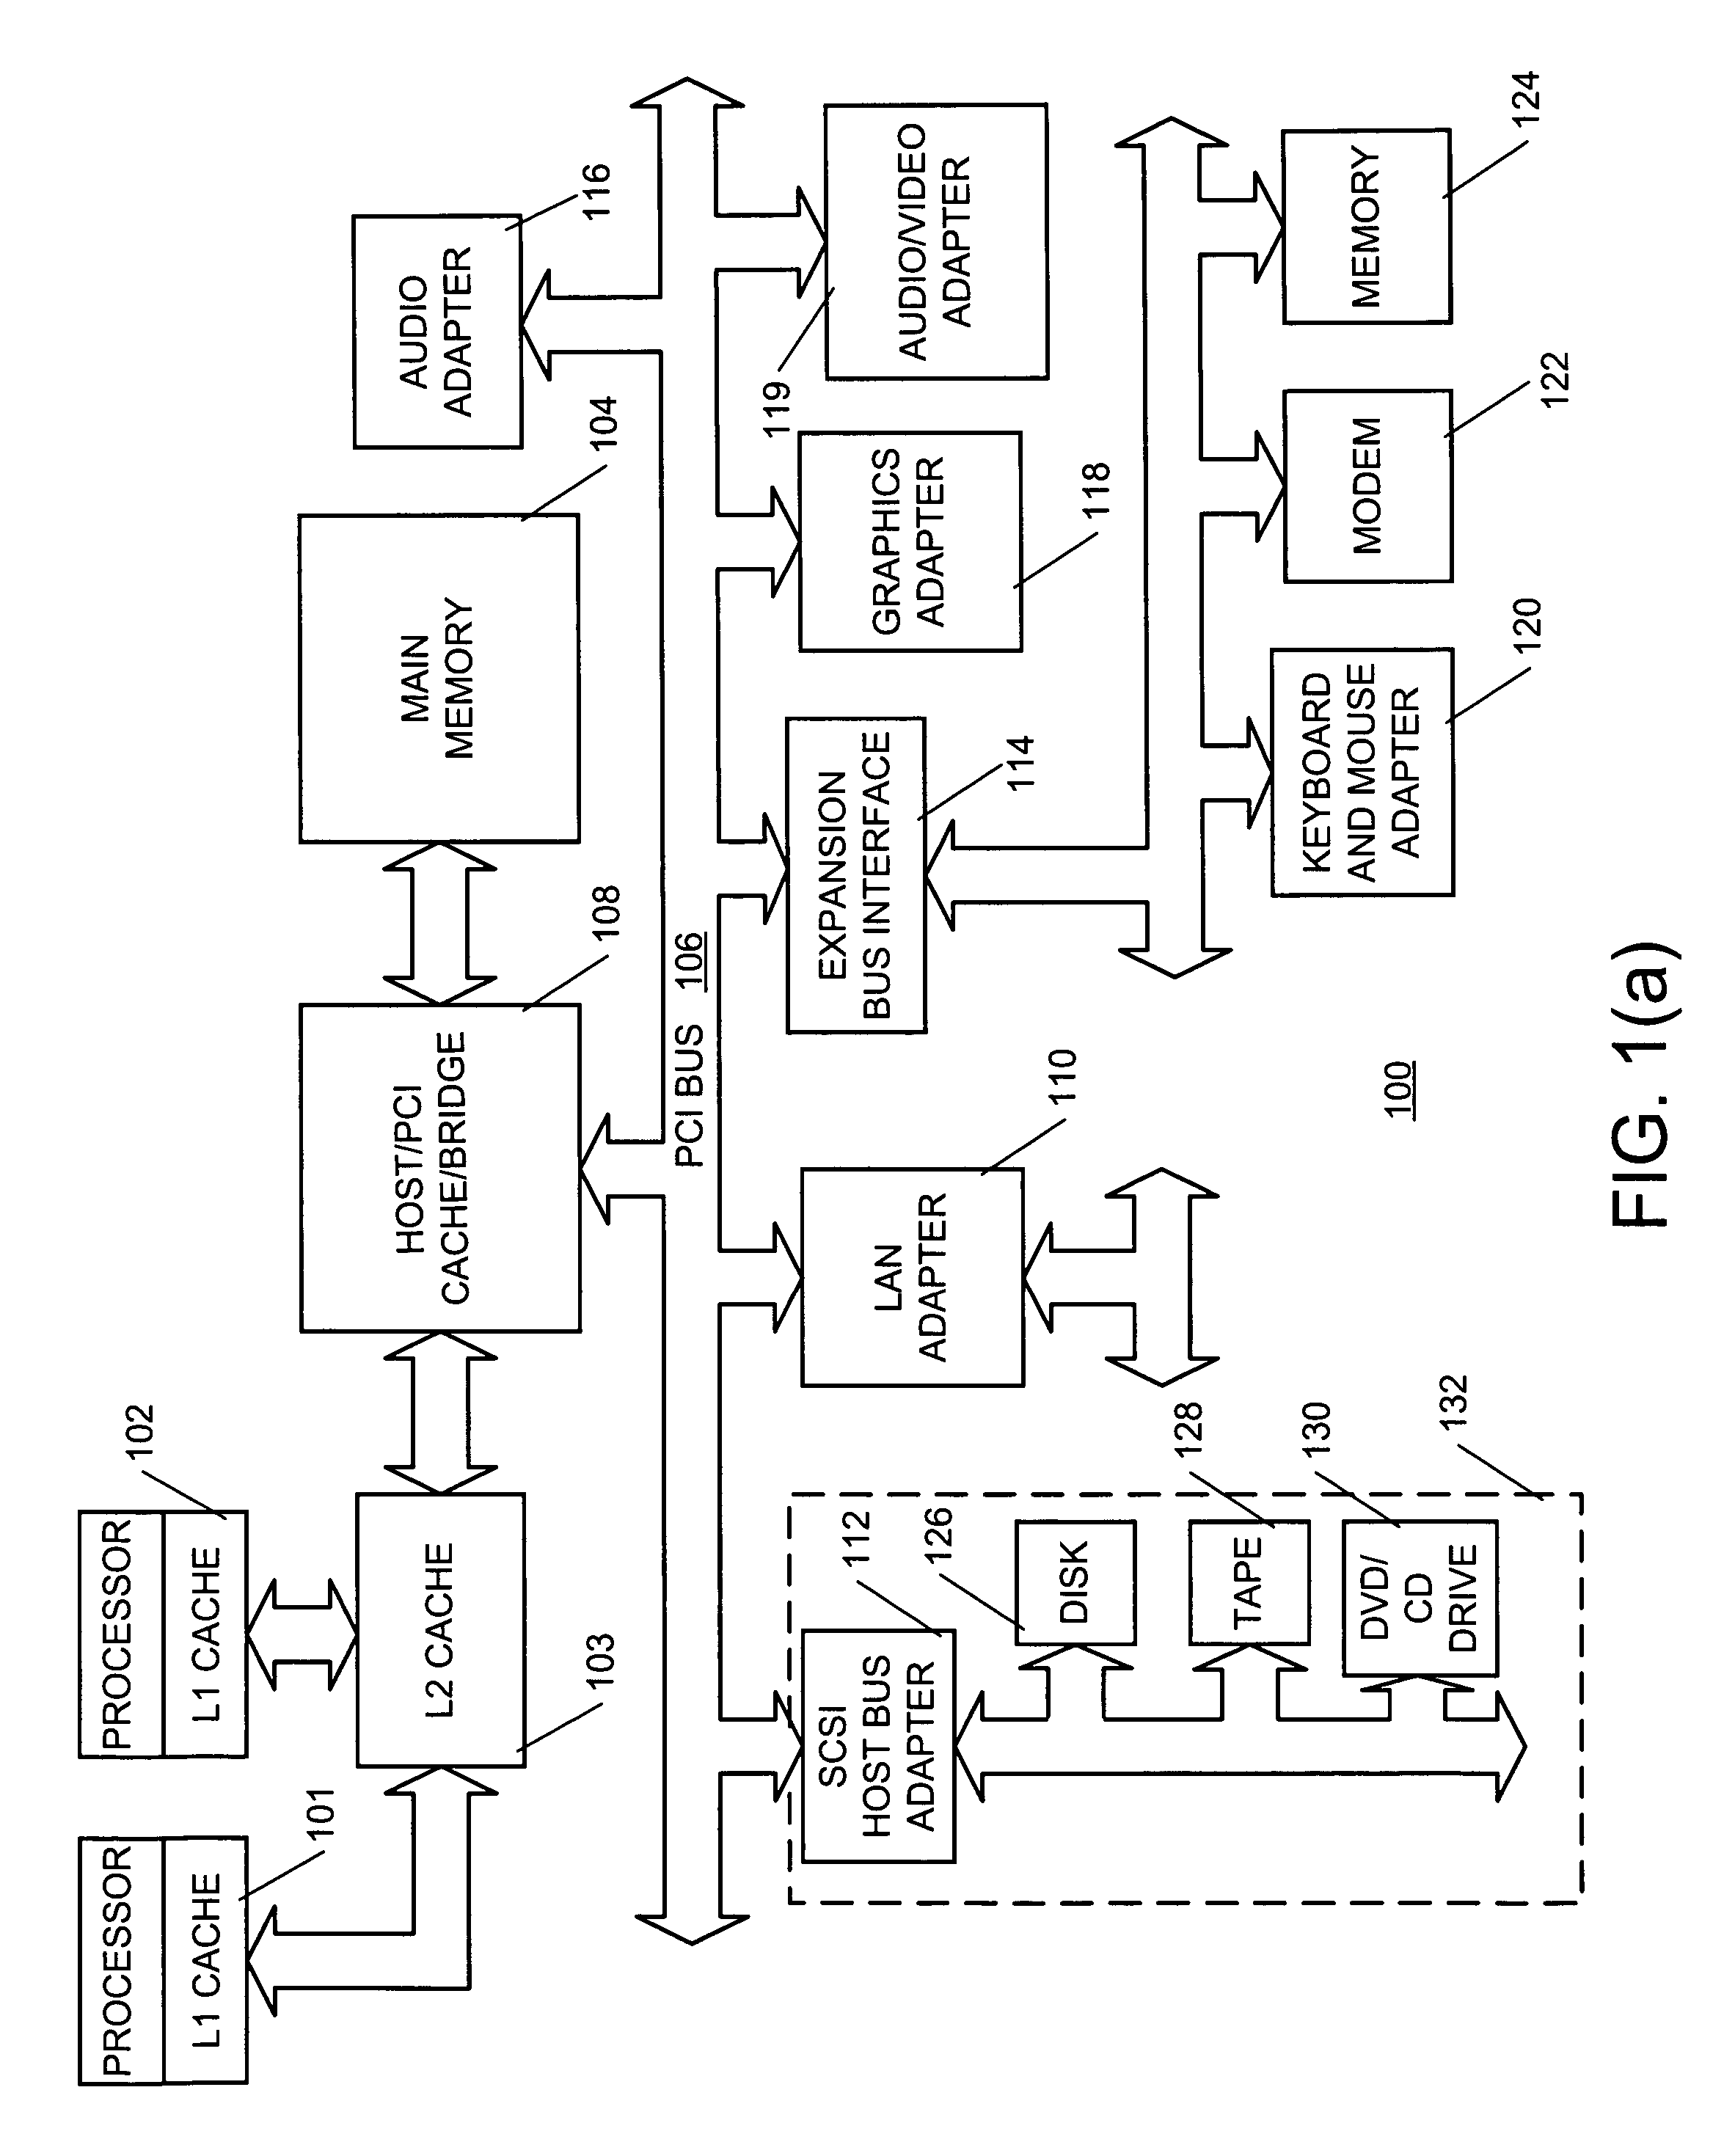 System, application and method of reducing cache thrashing in a multi-processor with a shared cache on which a disruptive process is executing